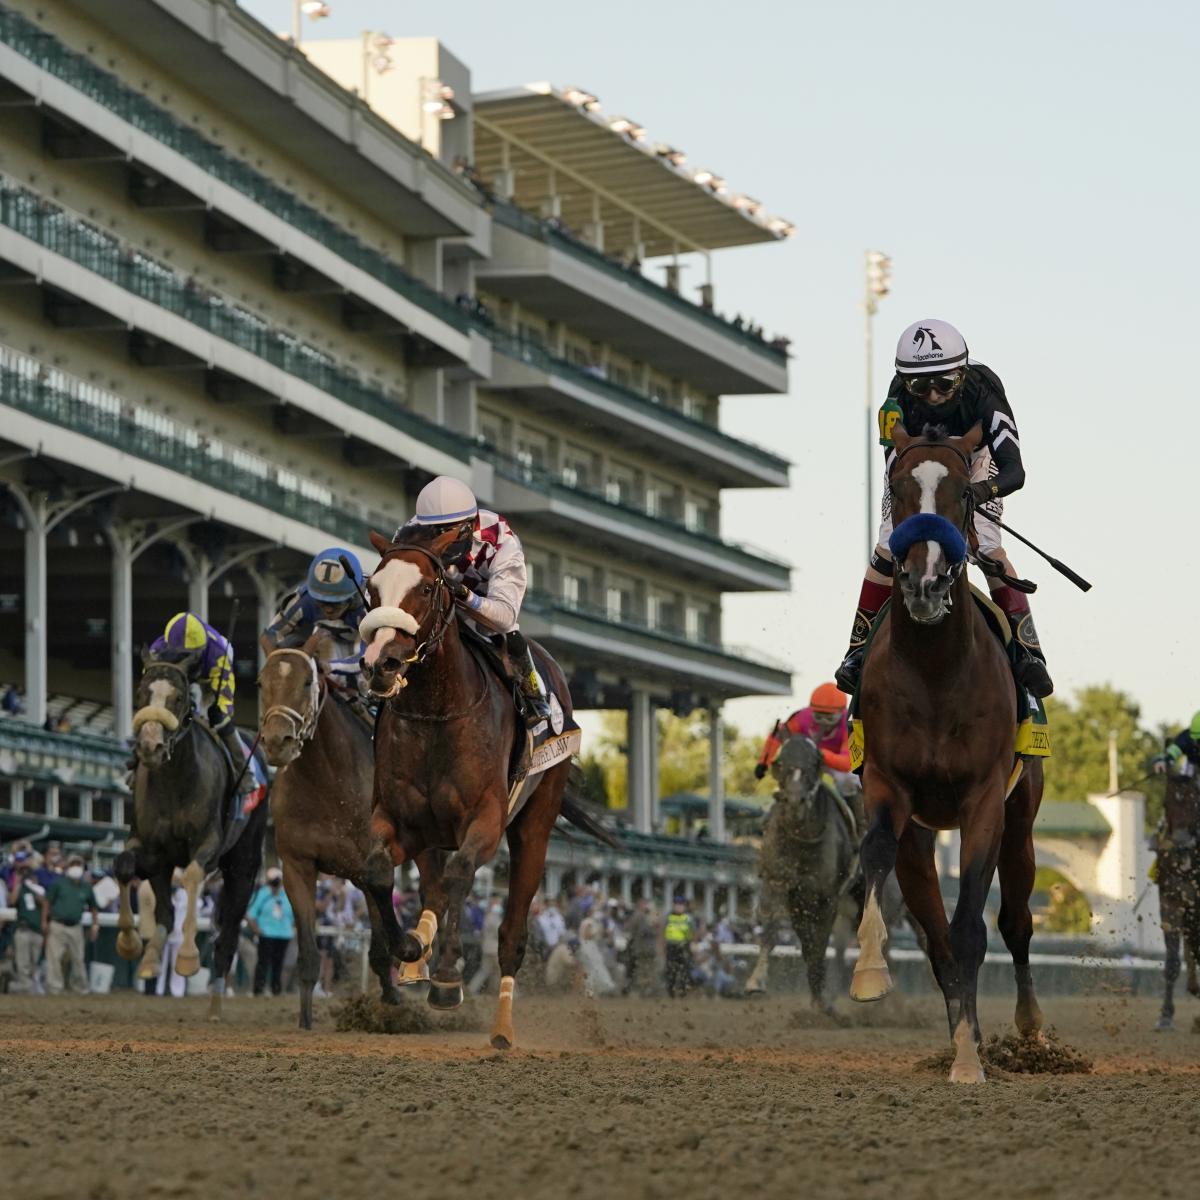 Kentucky Derby 2021 Complete Odds and Analysis for Top Contenders